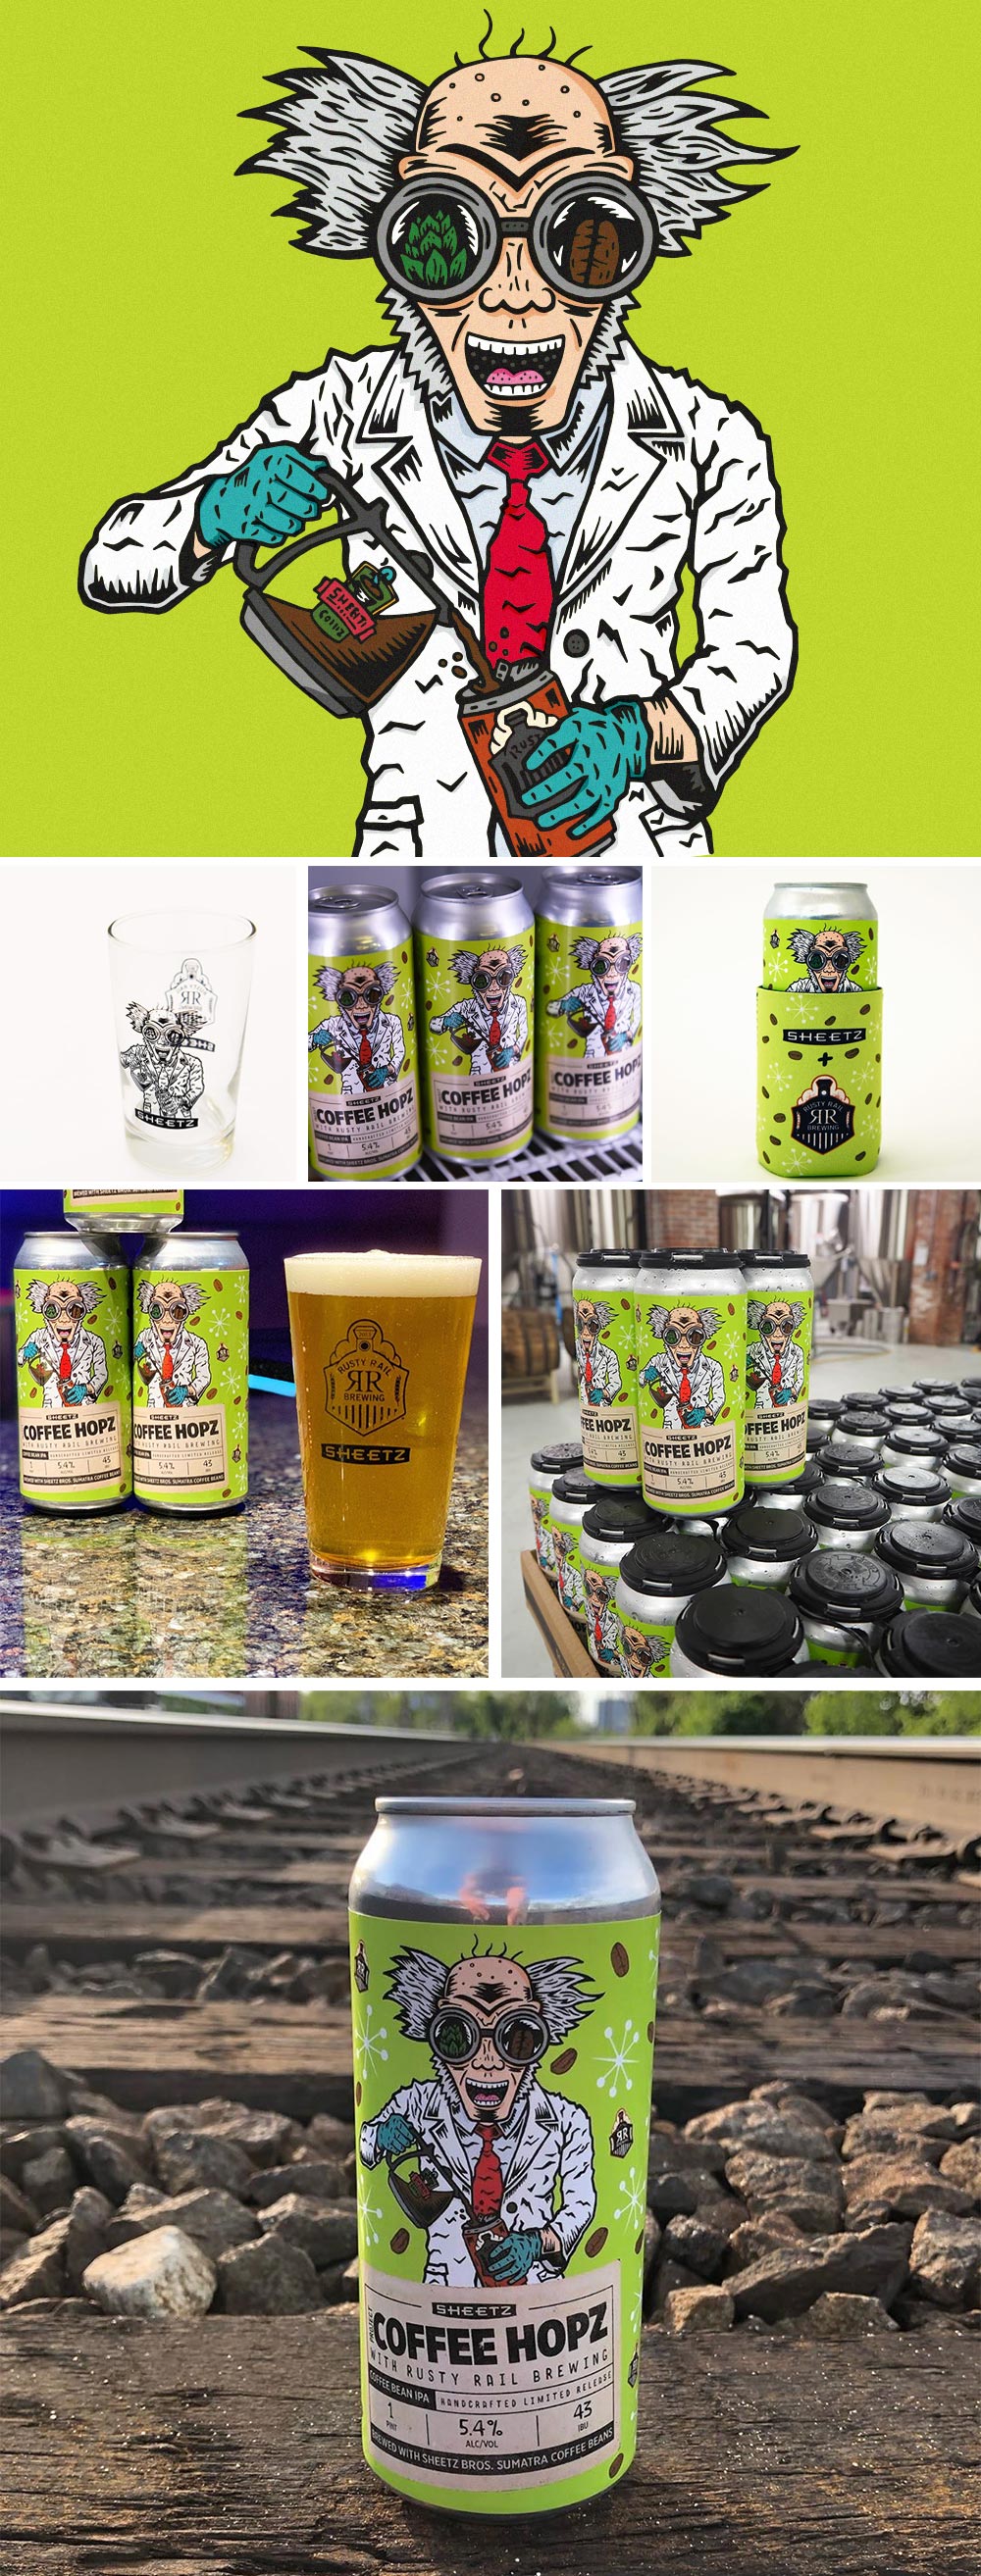 Various images of the illustration and the beer cans